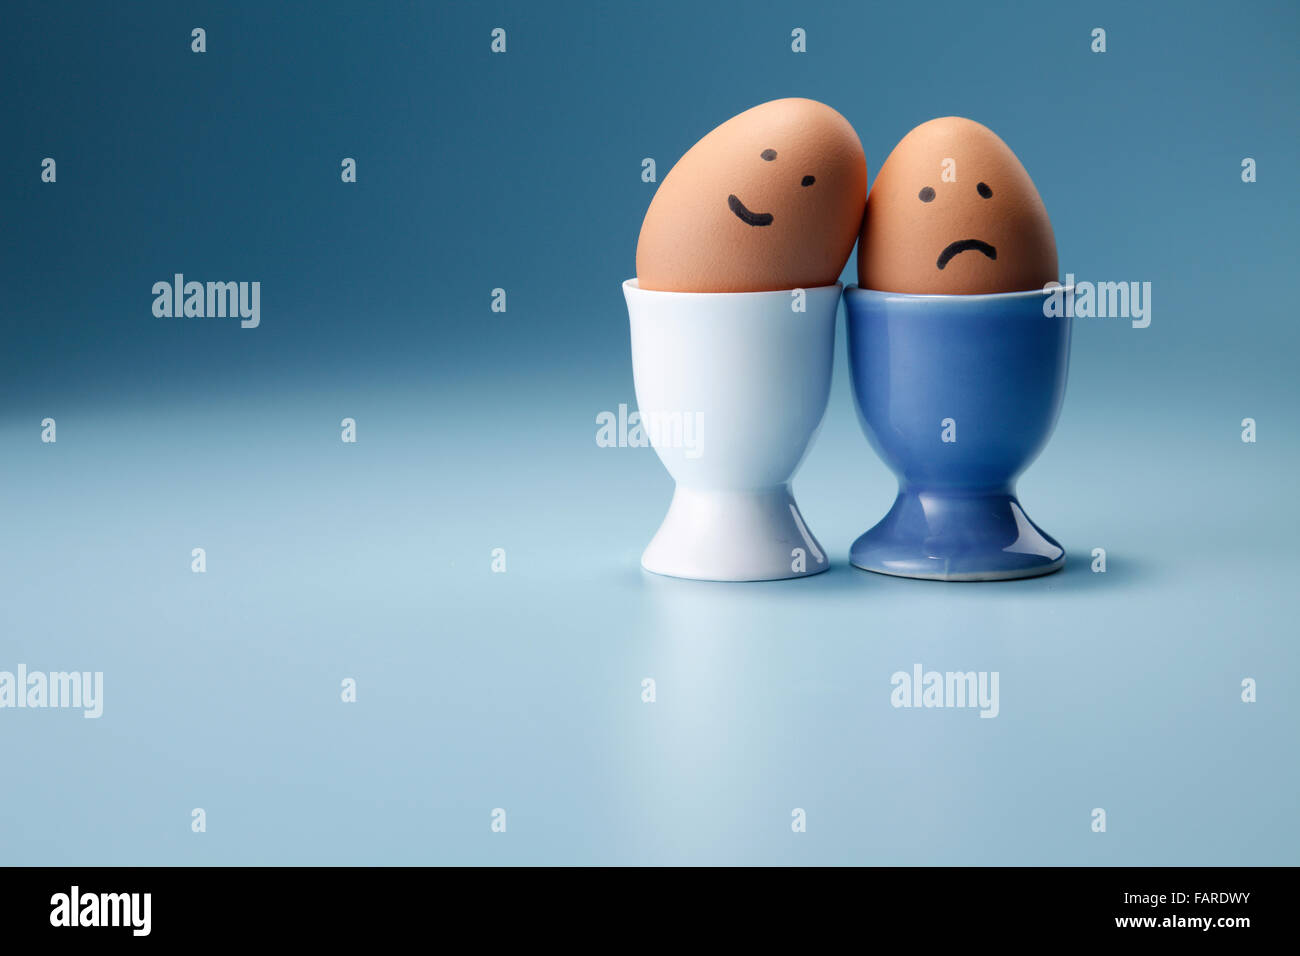 egg with funny face on the egg cup Stock Photo